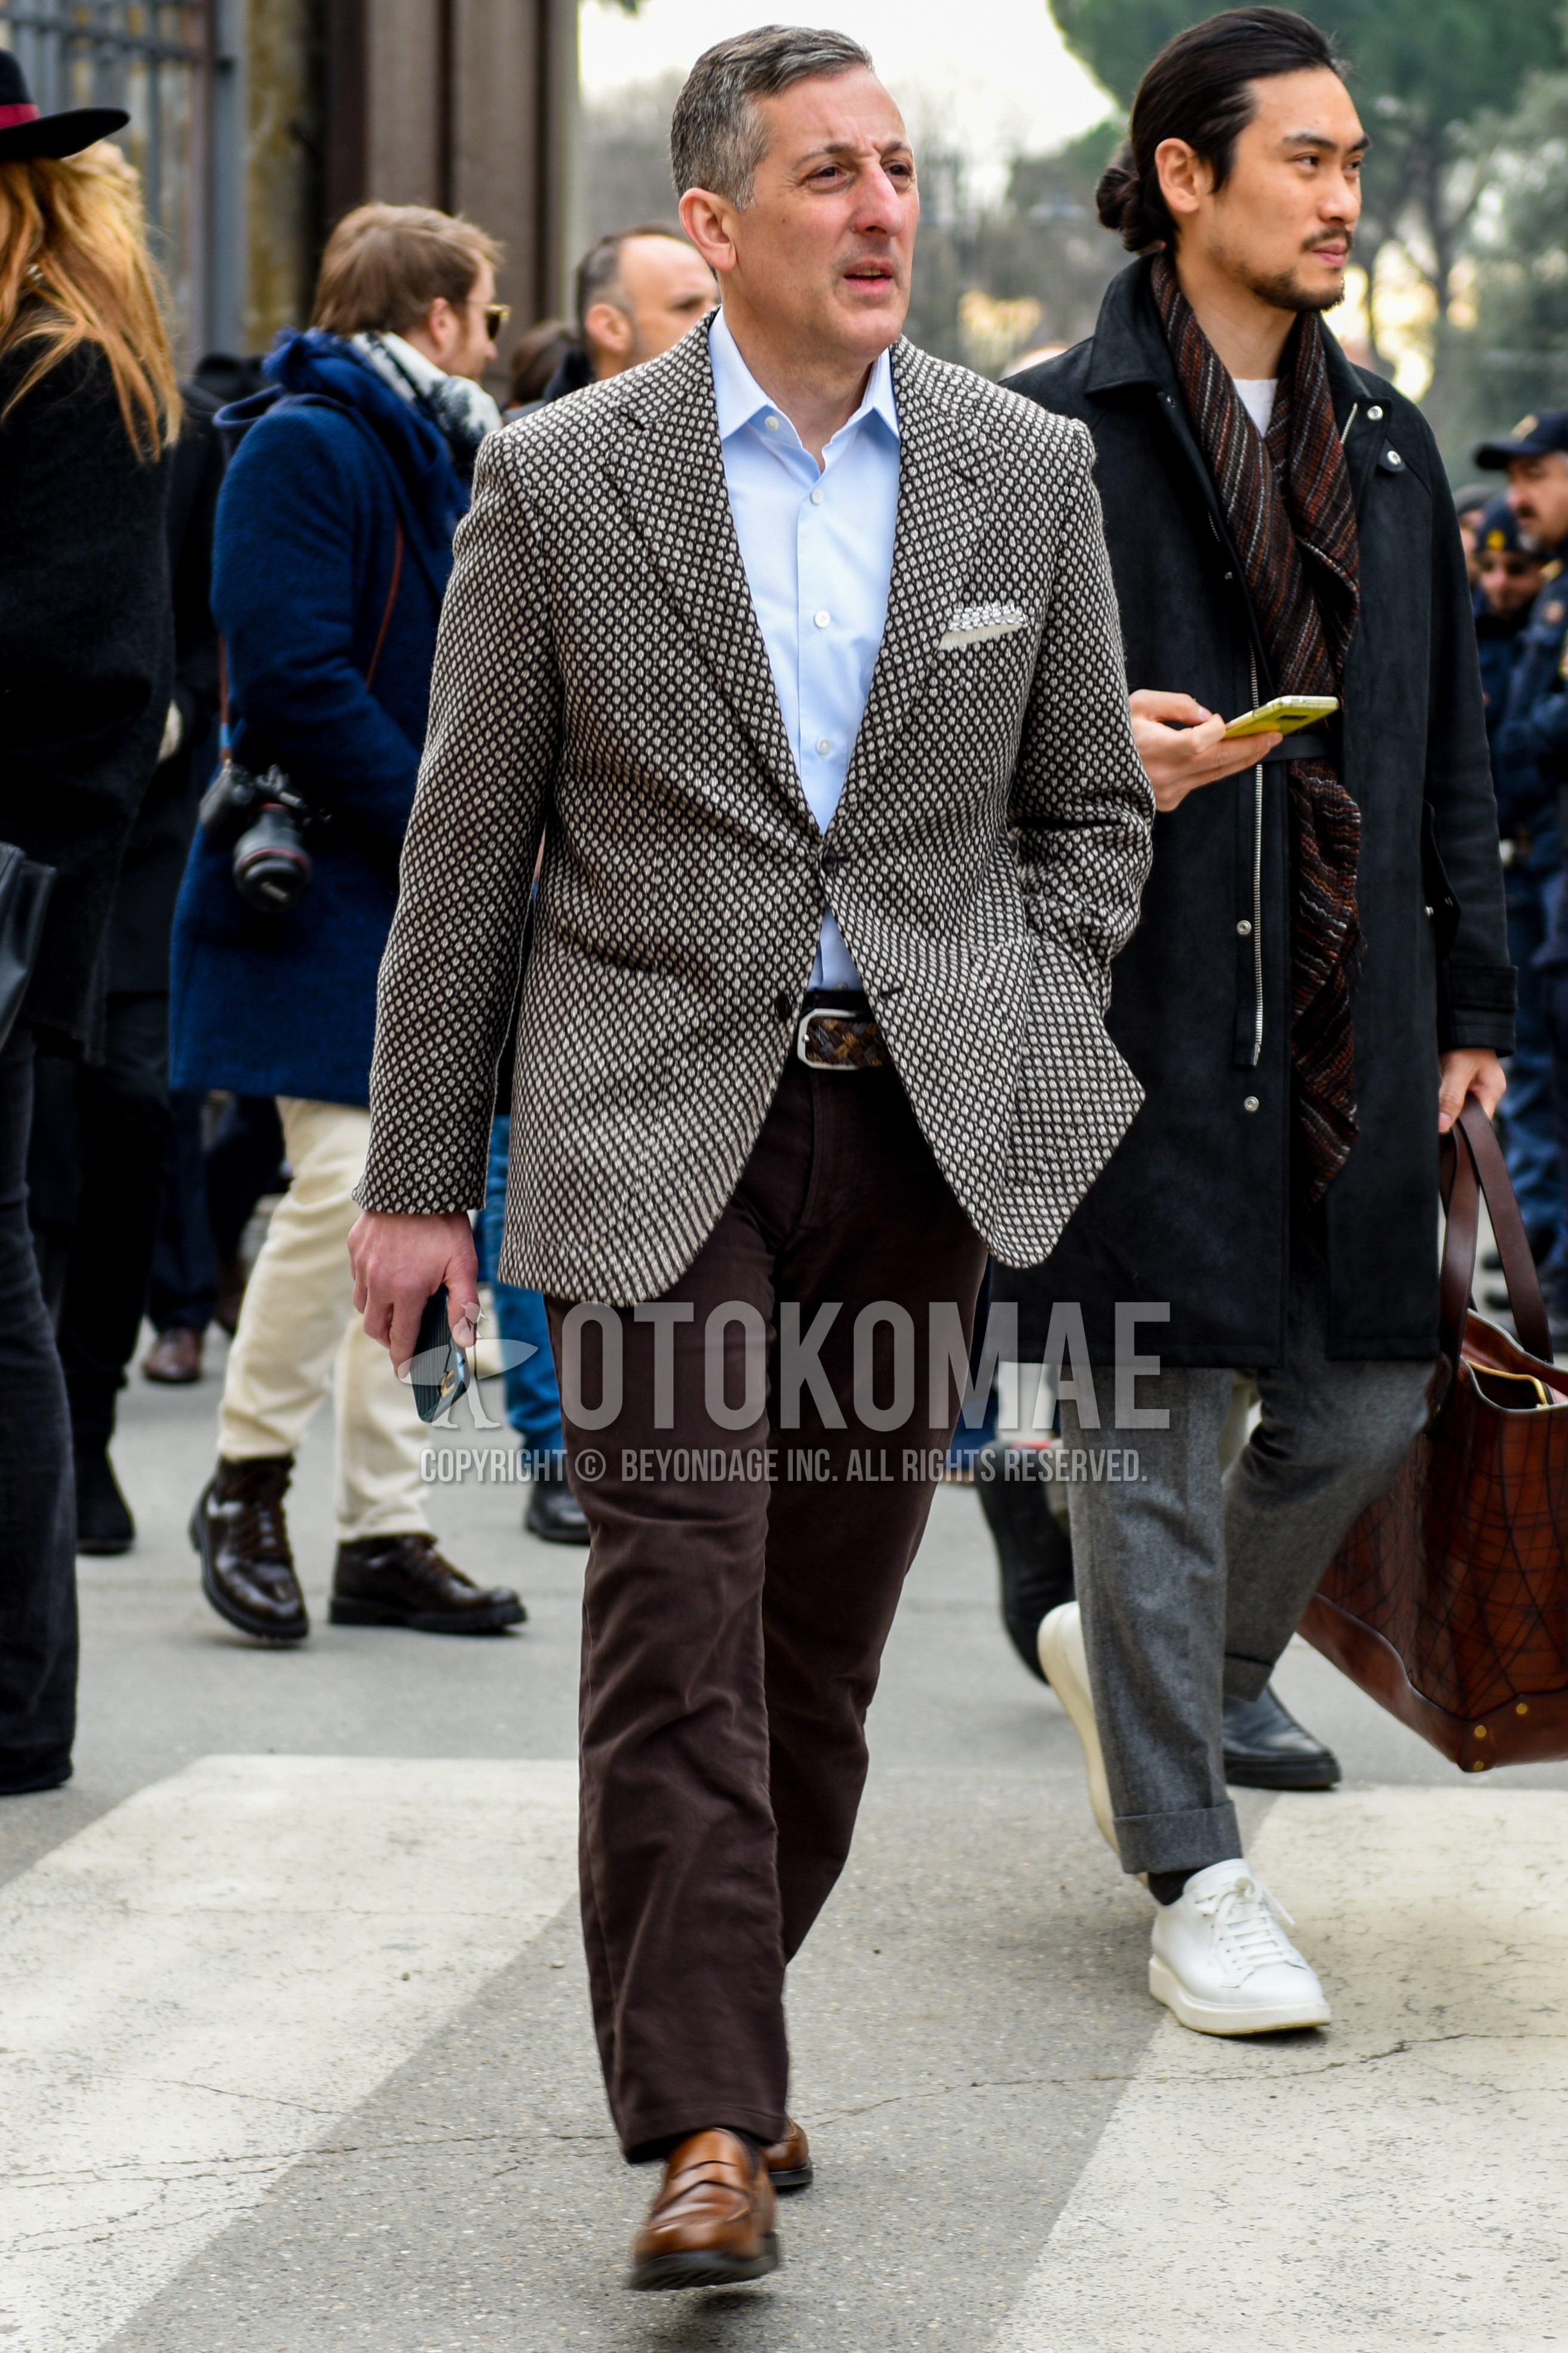 Men's spring autumn outfit with white black outerwear tailored jacket, light blue plain shirt, brown plain leather belt, brown plain slacks, brown coin loafers leather shoes.